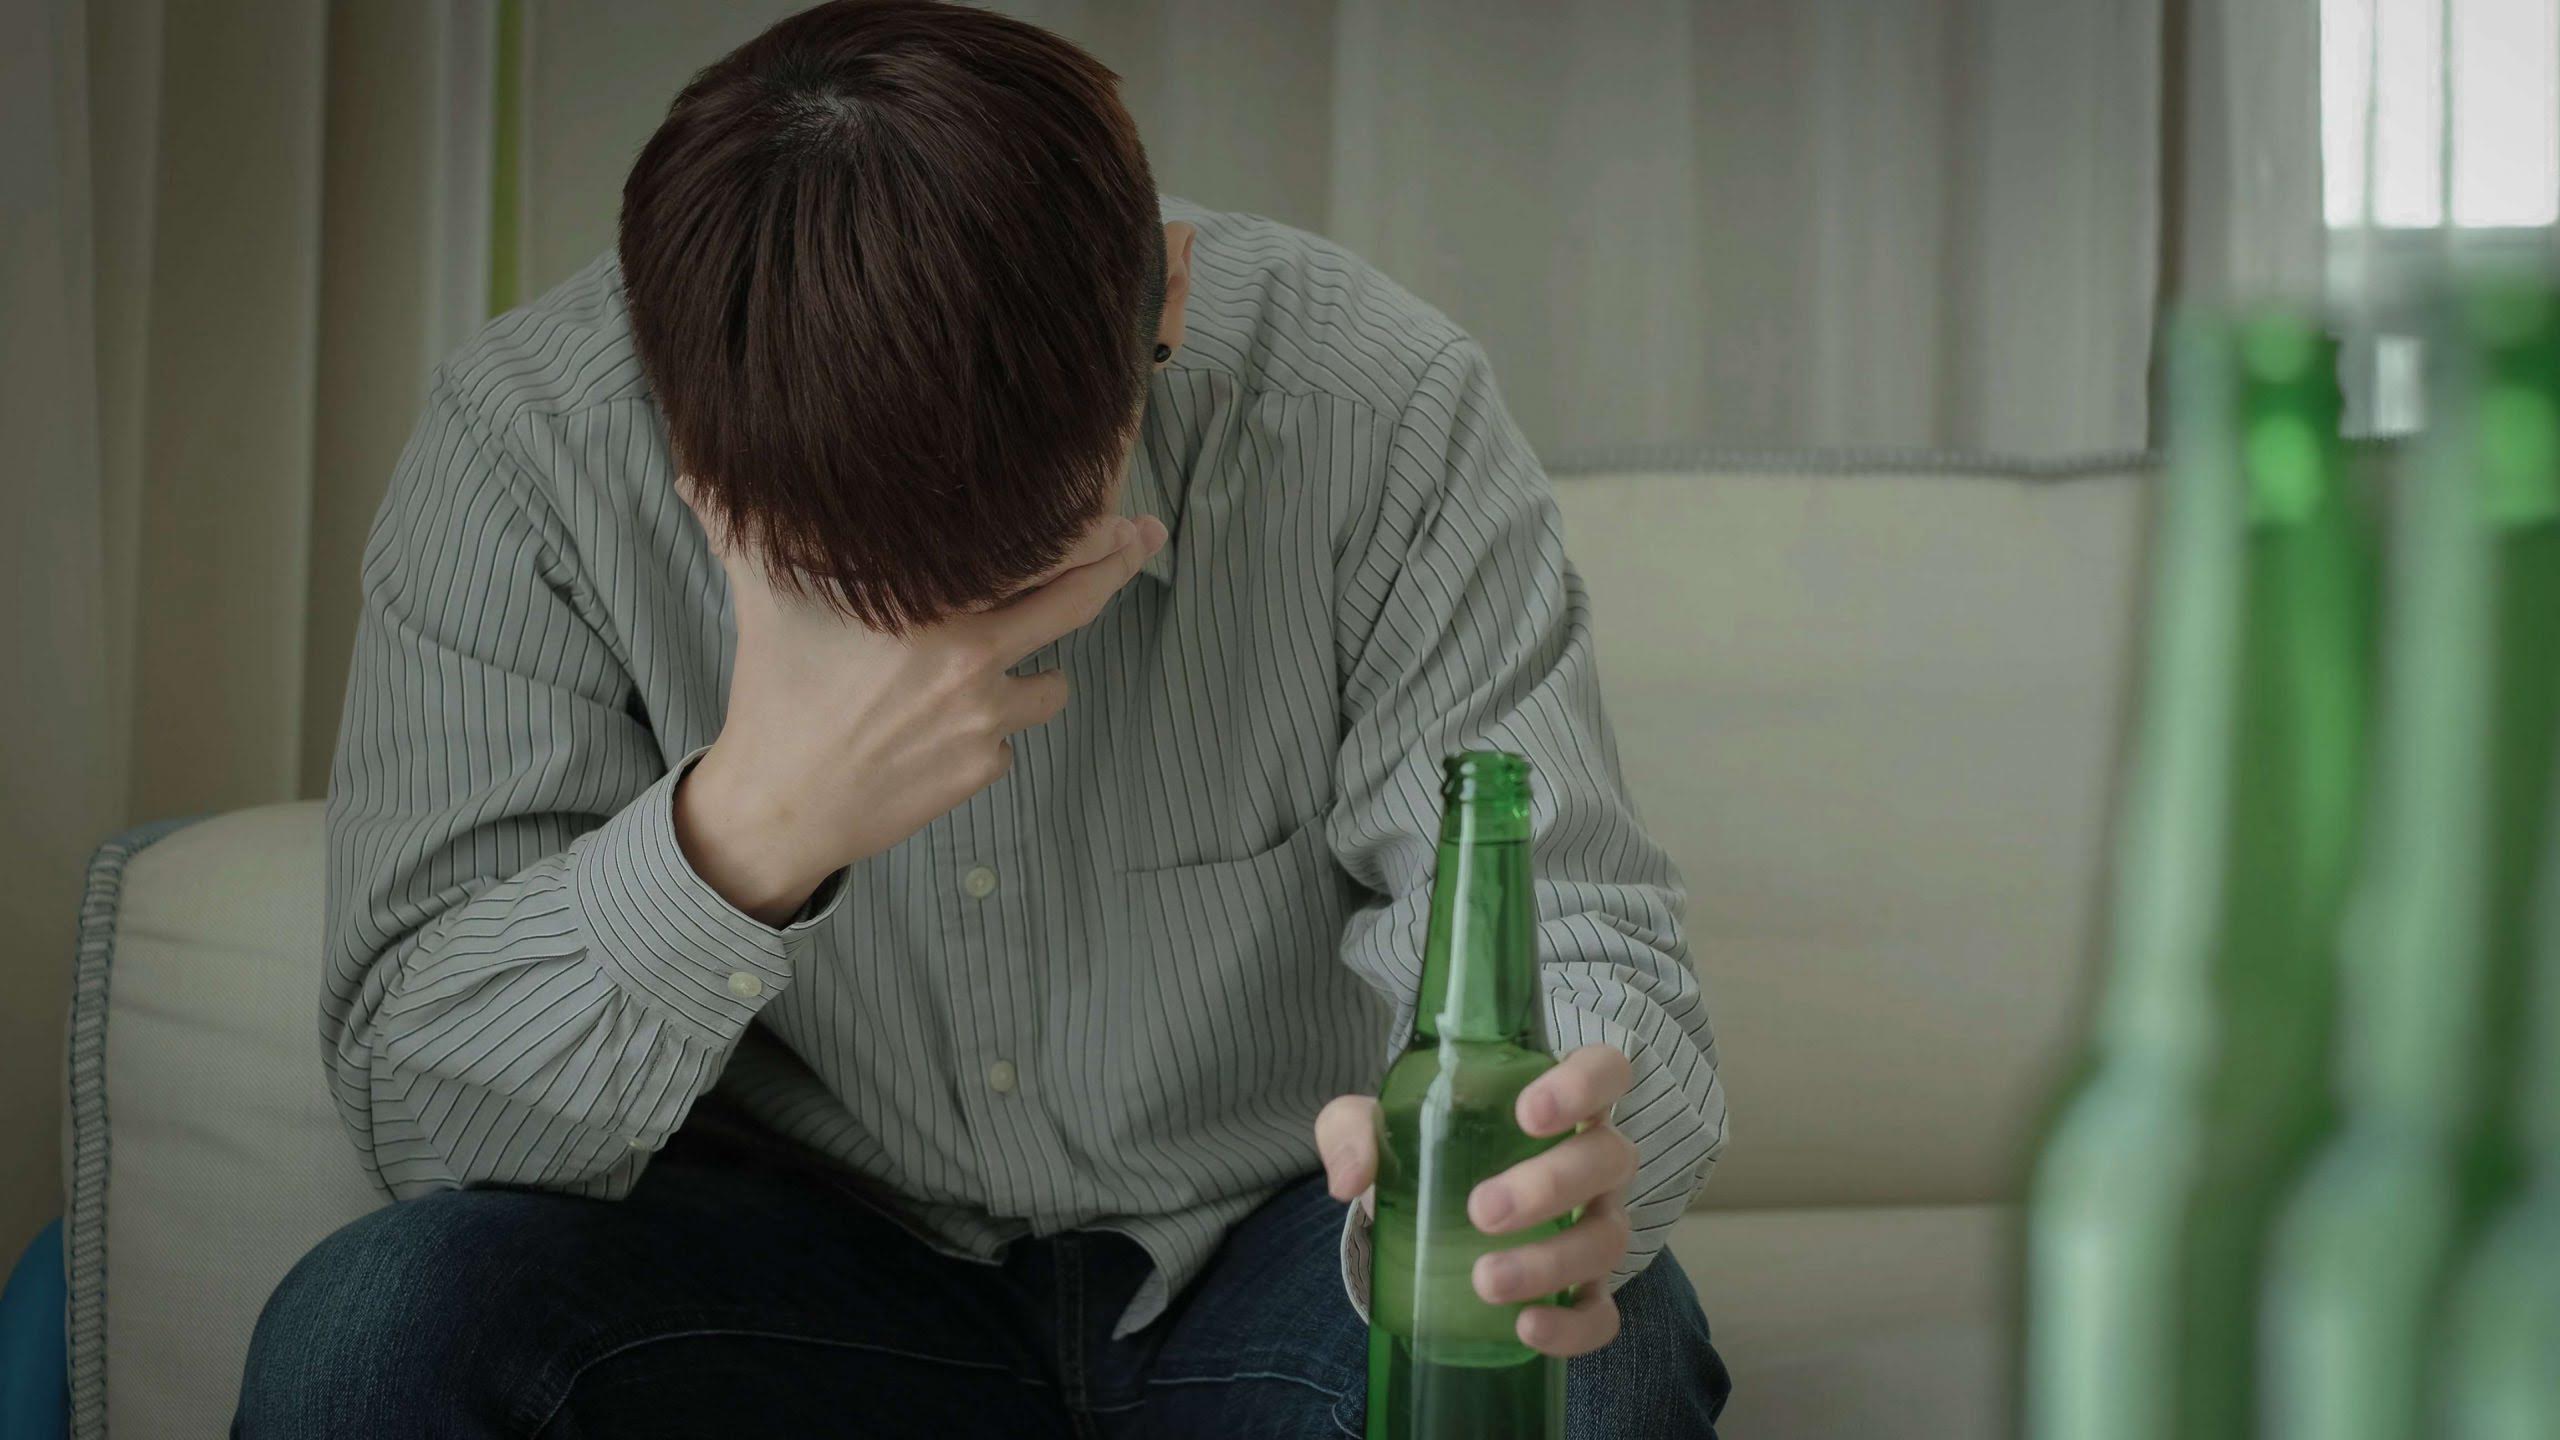 what are the different stages of alcoholism